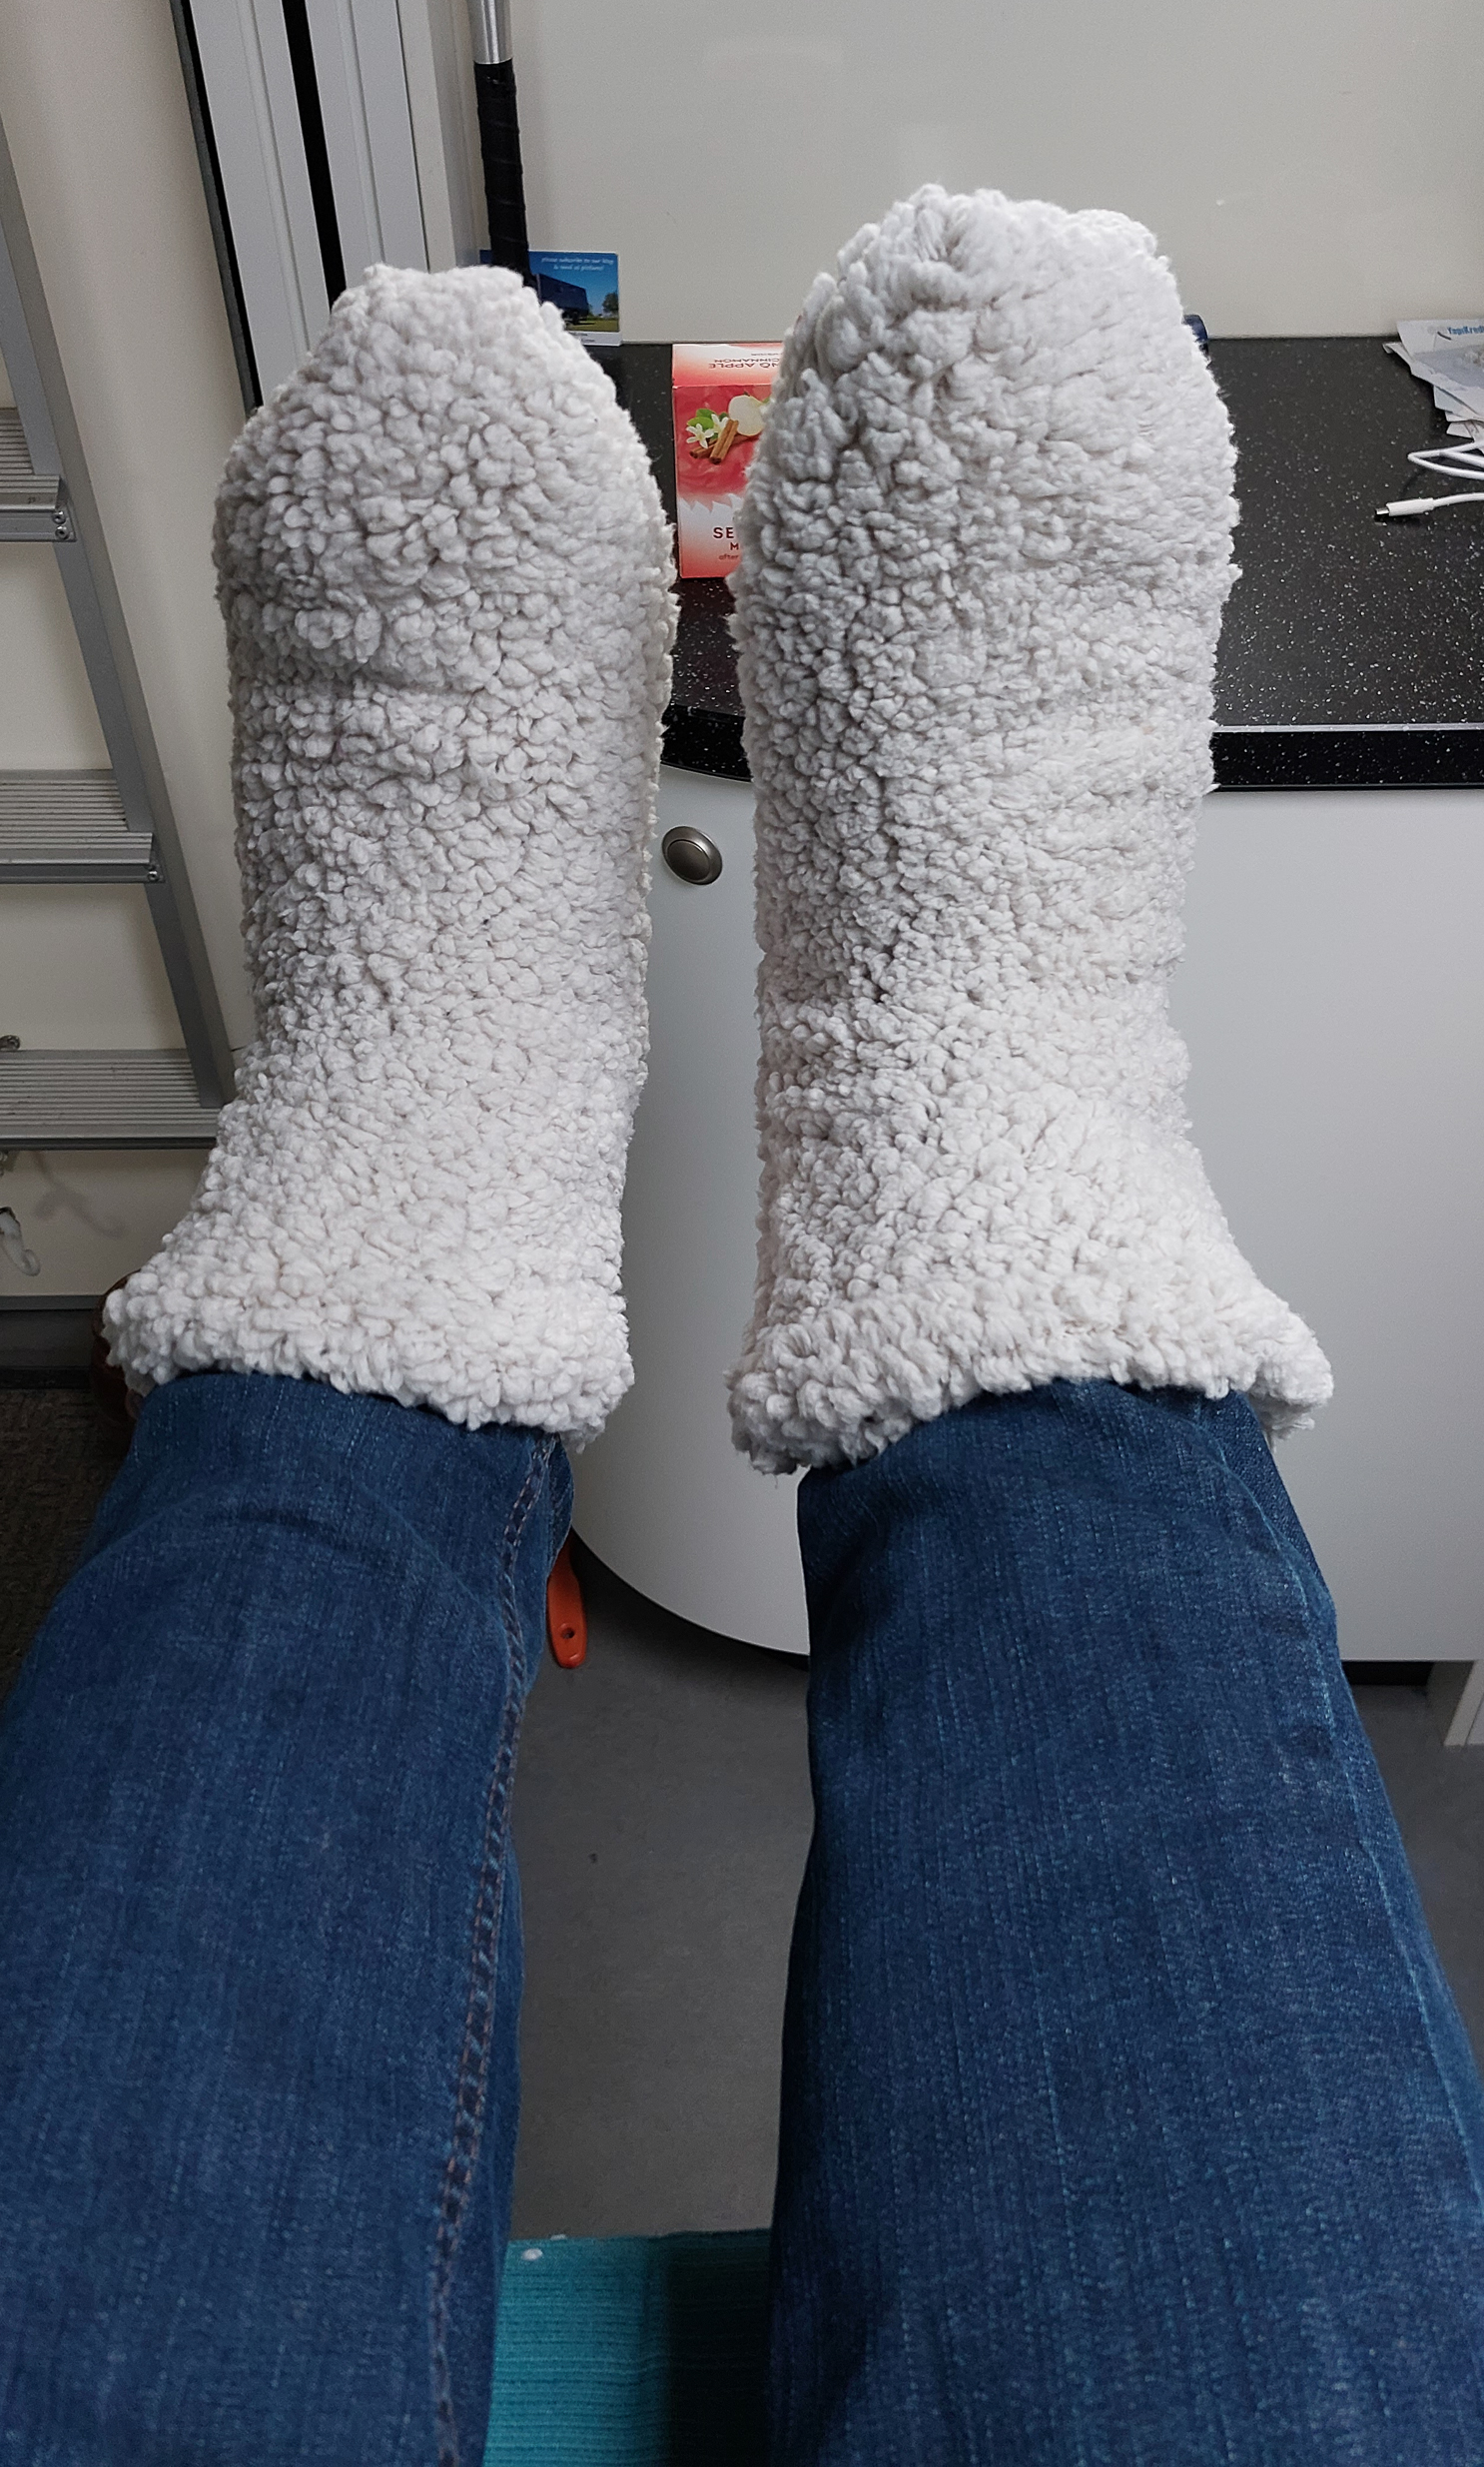 <span  class="uc_style_uc_tiles_grid_image_elementor_uc_items_attribute_title" style="color:#FFFFFF;">Carsten bought really pretty 'feet-warmers'</span>